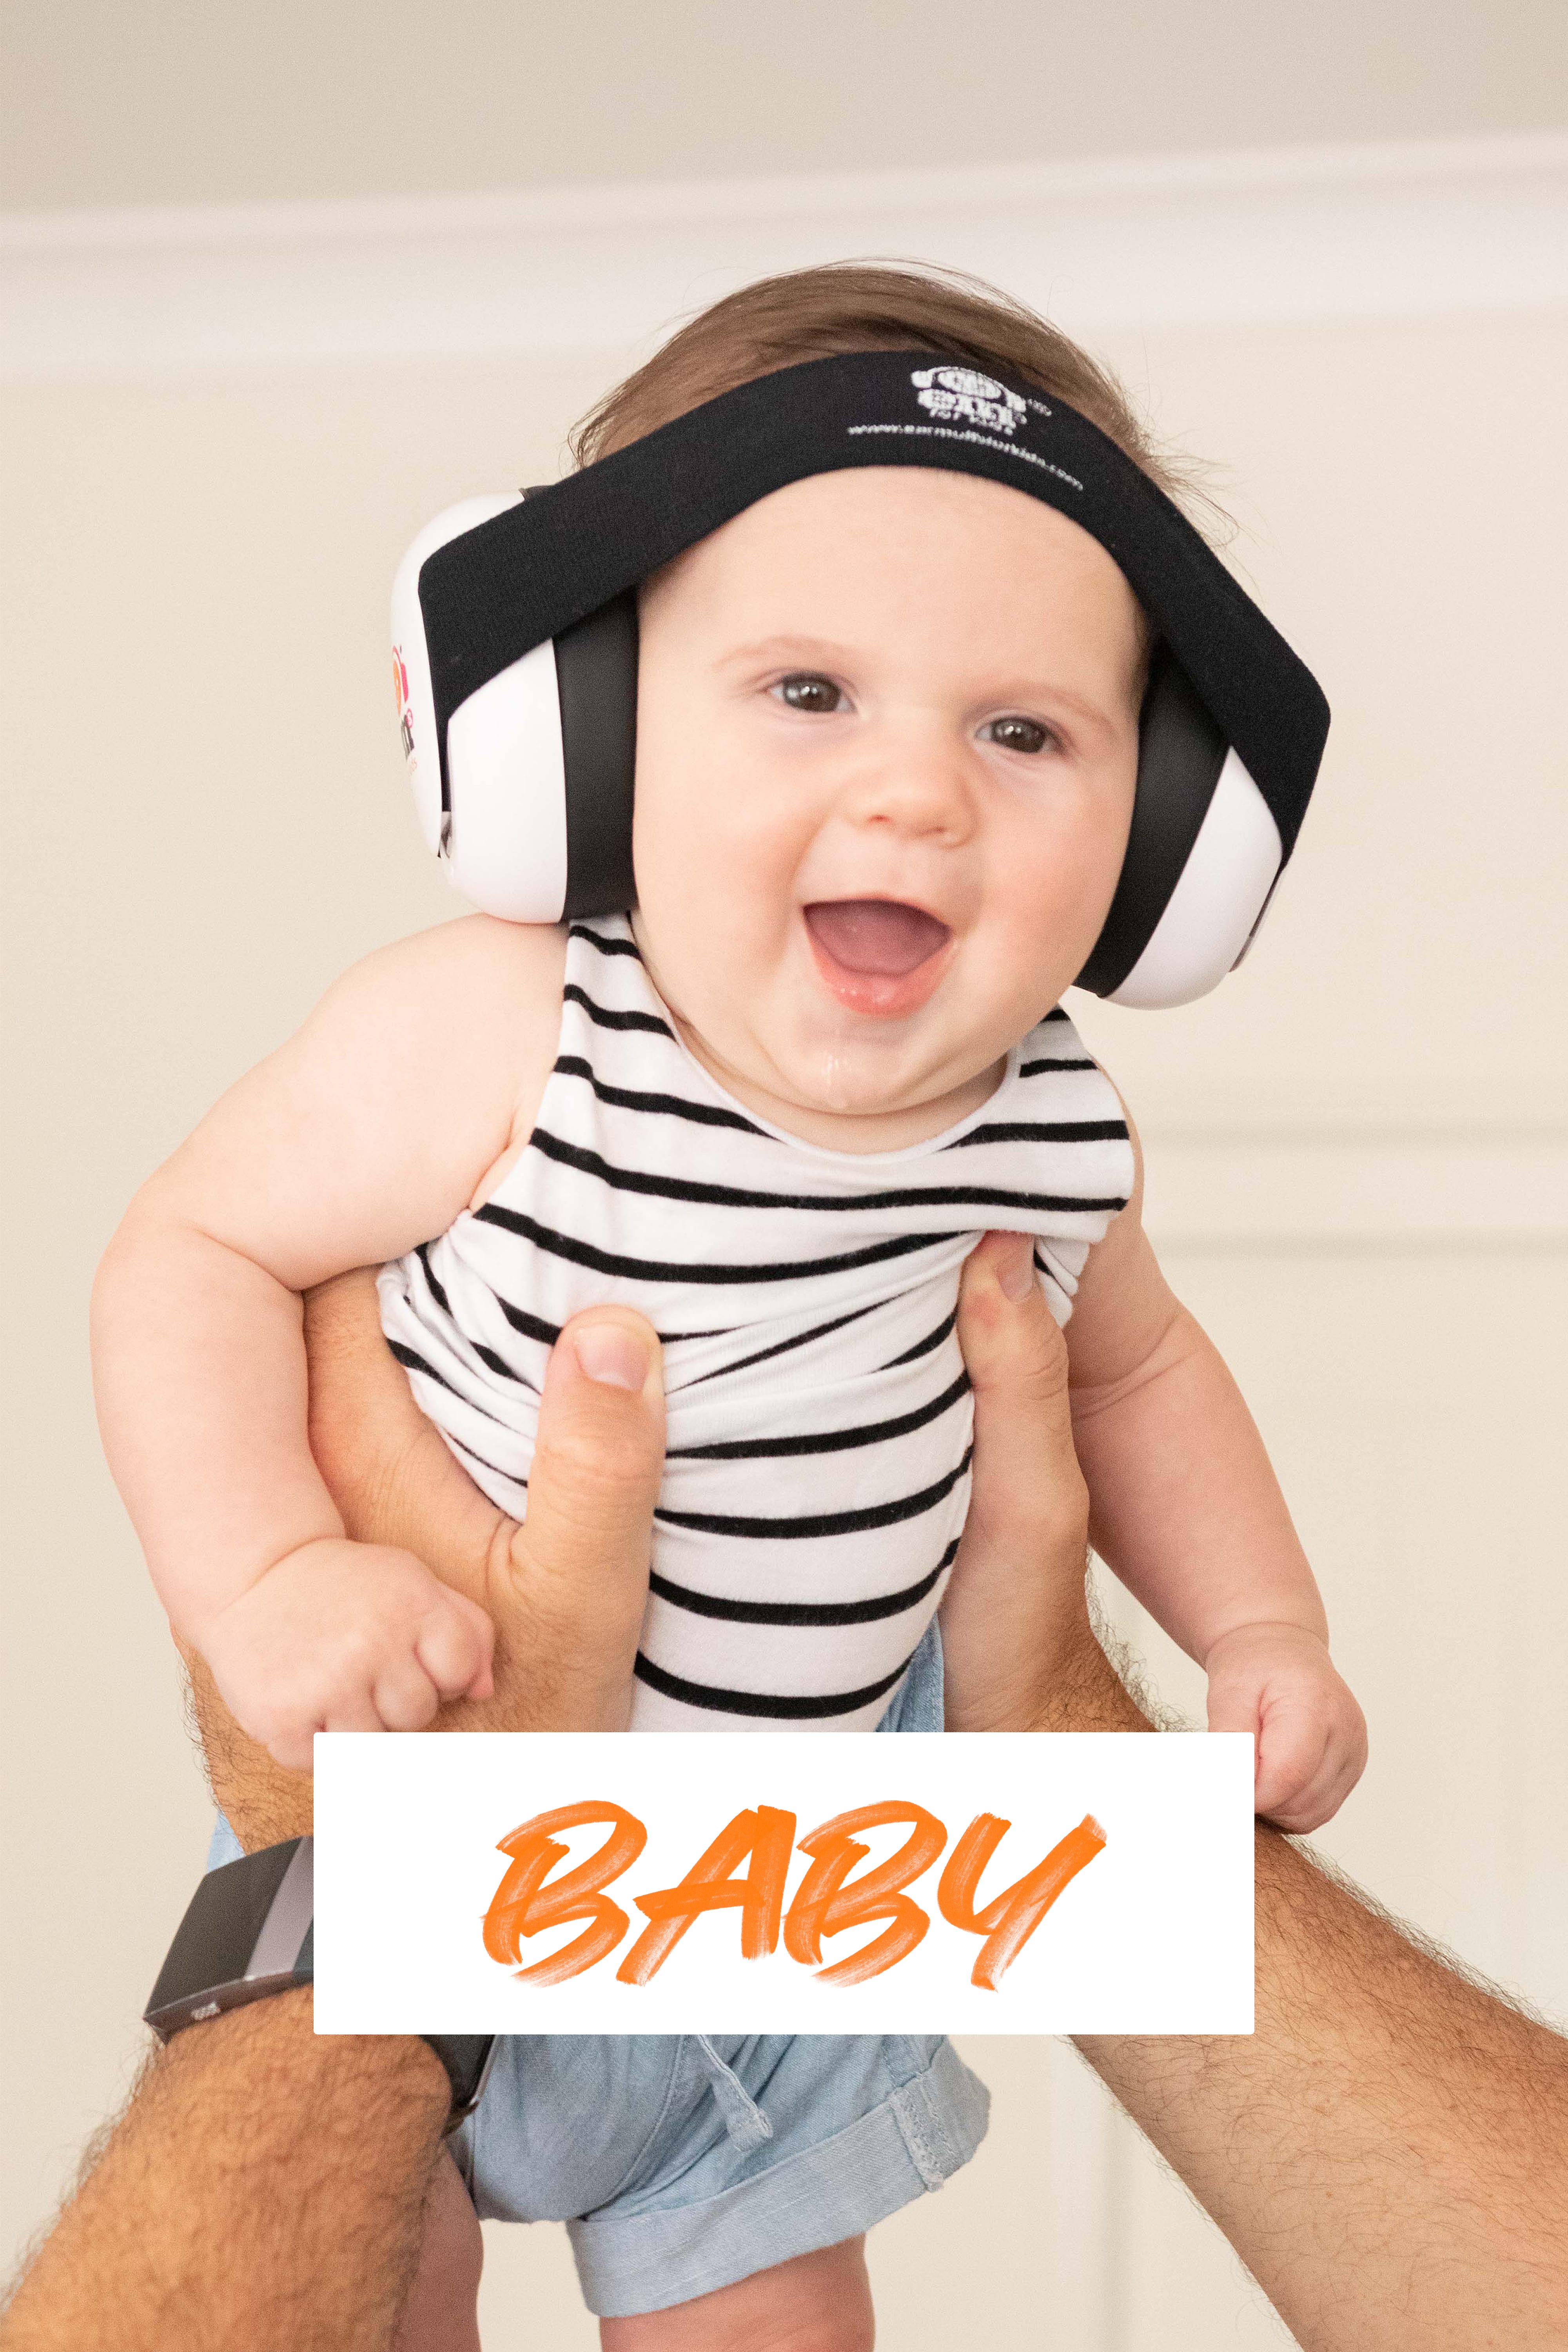 Baby Safety Ear Muffs Noise Cancelling Headphones For Kids Hearing Protection 